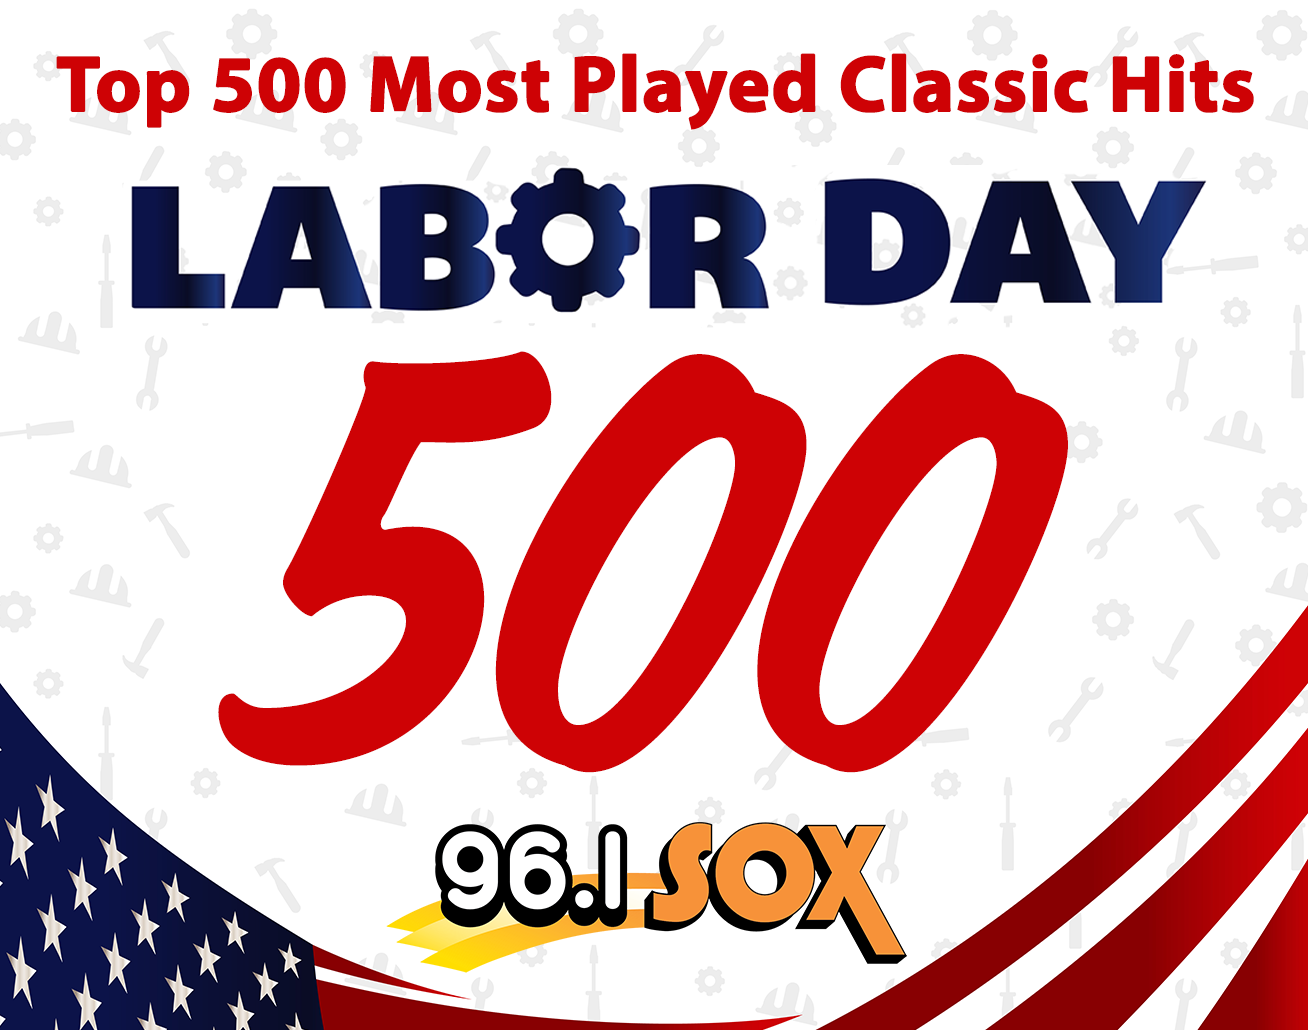 The Top 500 Most Played Classic Hits from the Labor Day 500